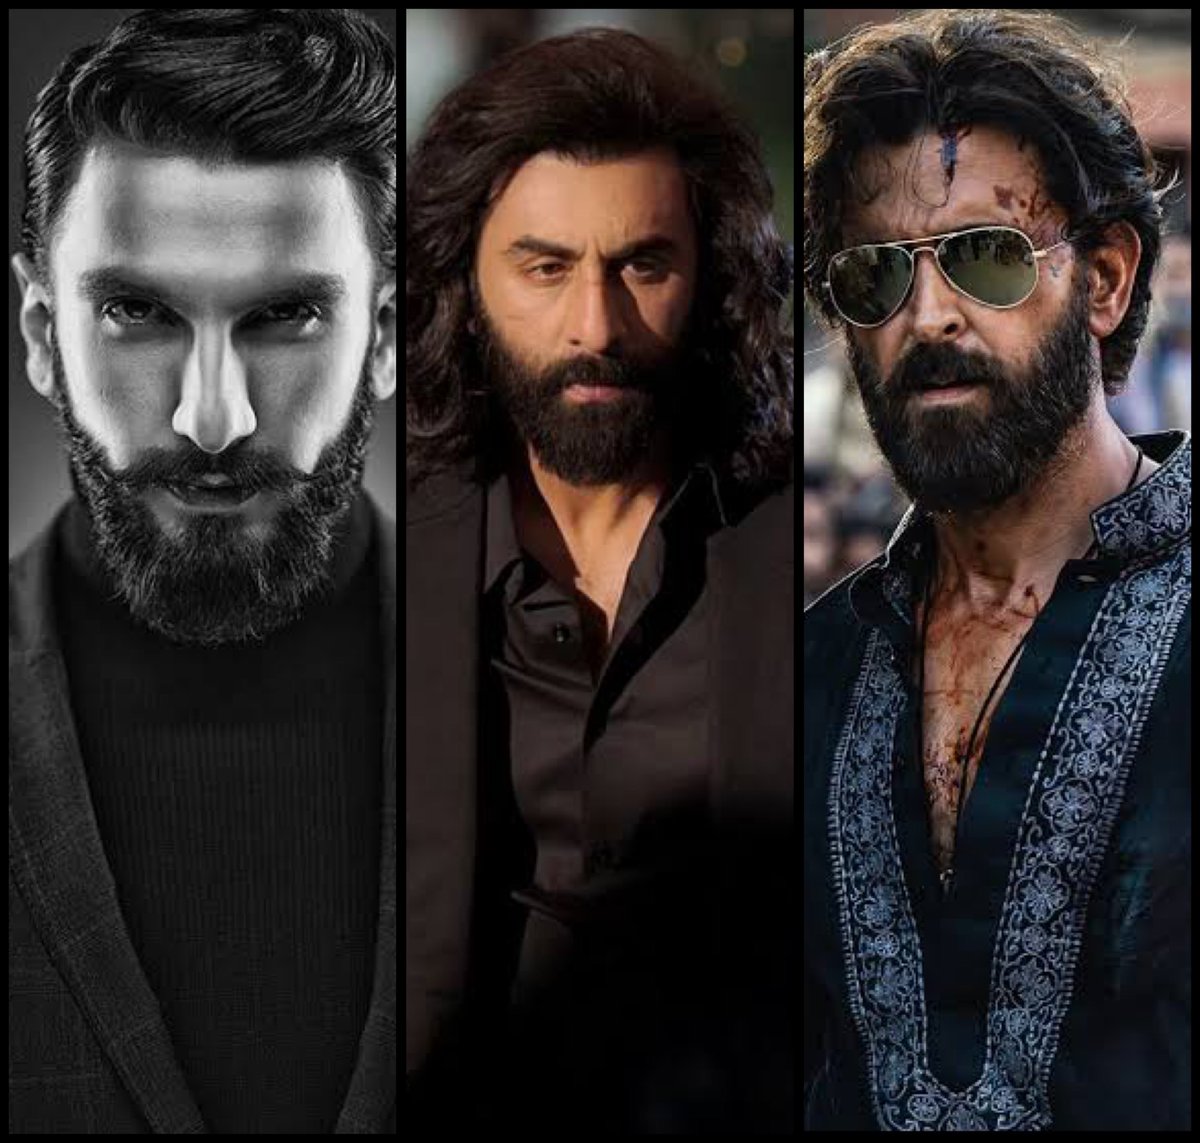 It's a common misconception that roles like RanVijay Singh require exceptional acting skills. In fact, many actors excel in negative or grey-shaded characters. When it comes to films like Animal, Hrithik, Shahid and Ranveer are the perfect choice, apart from RK.